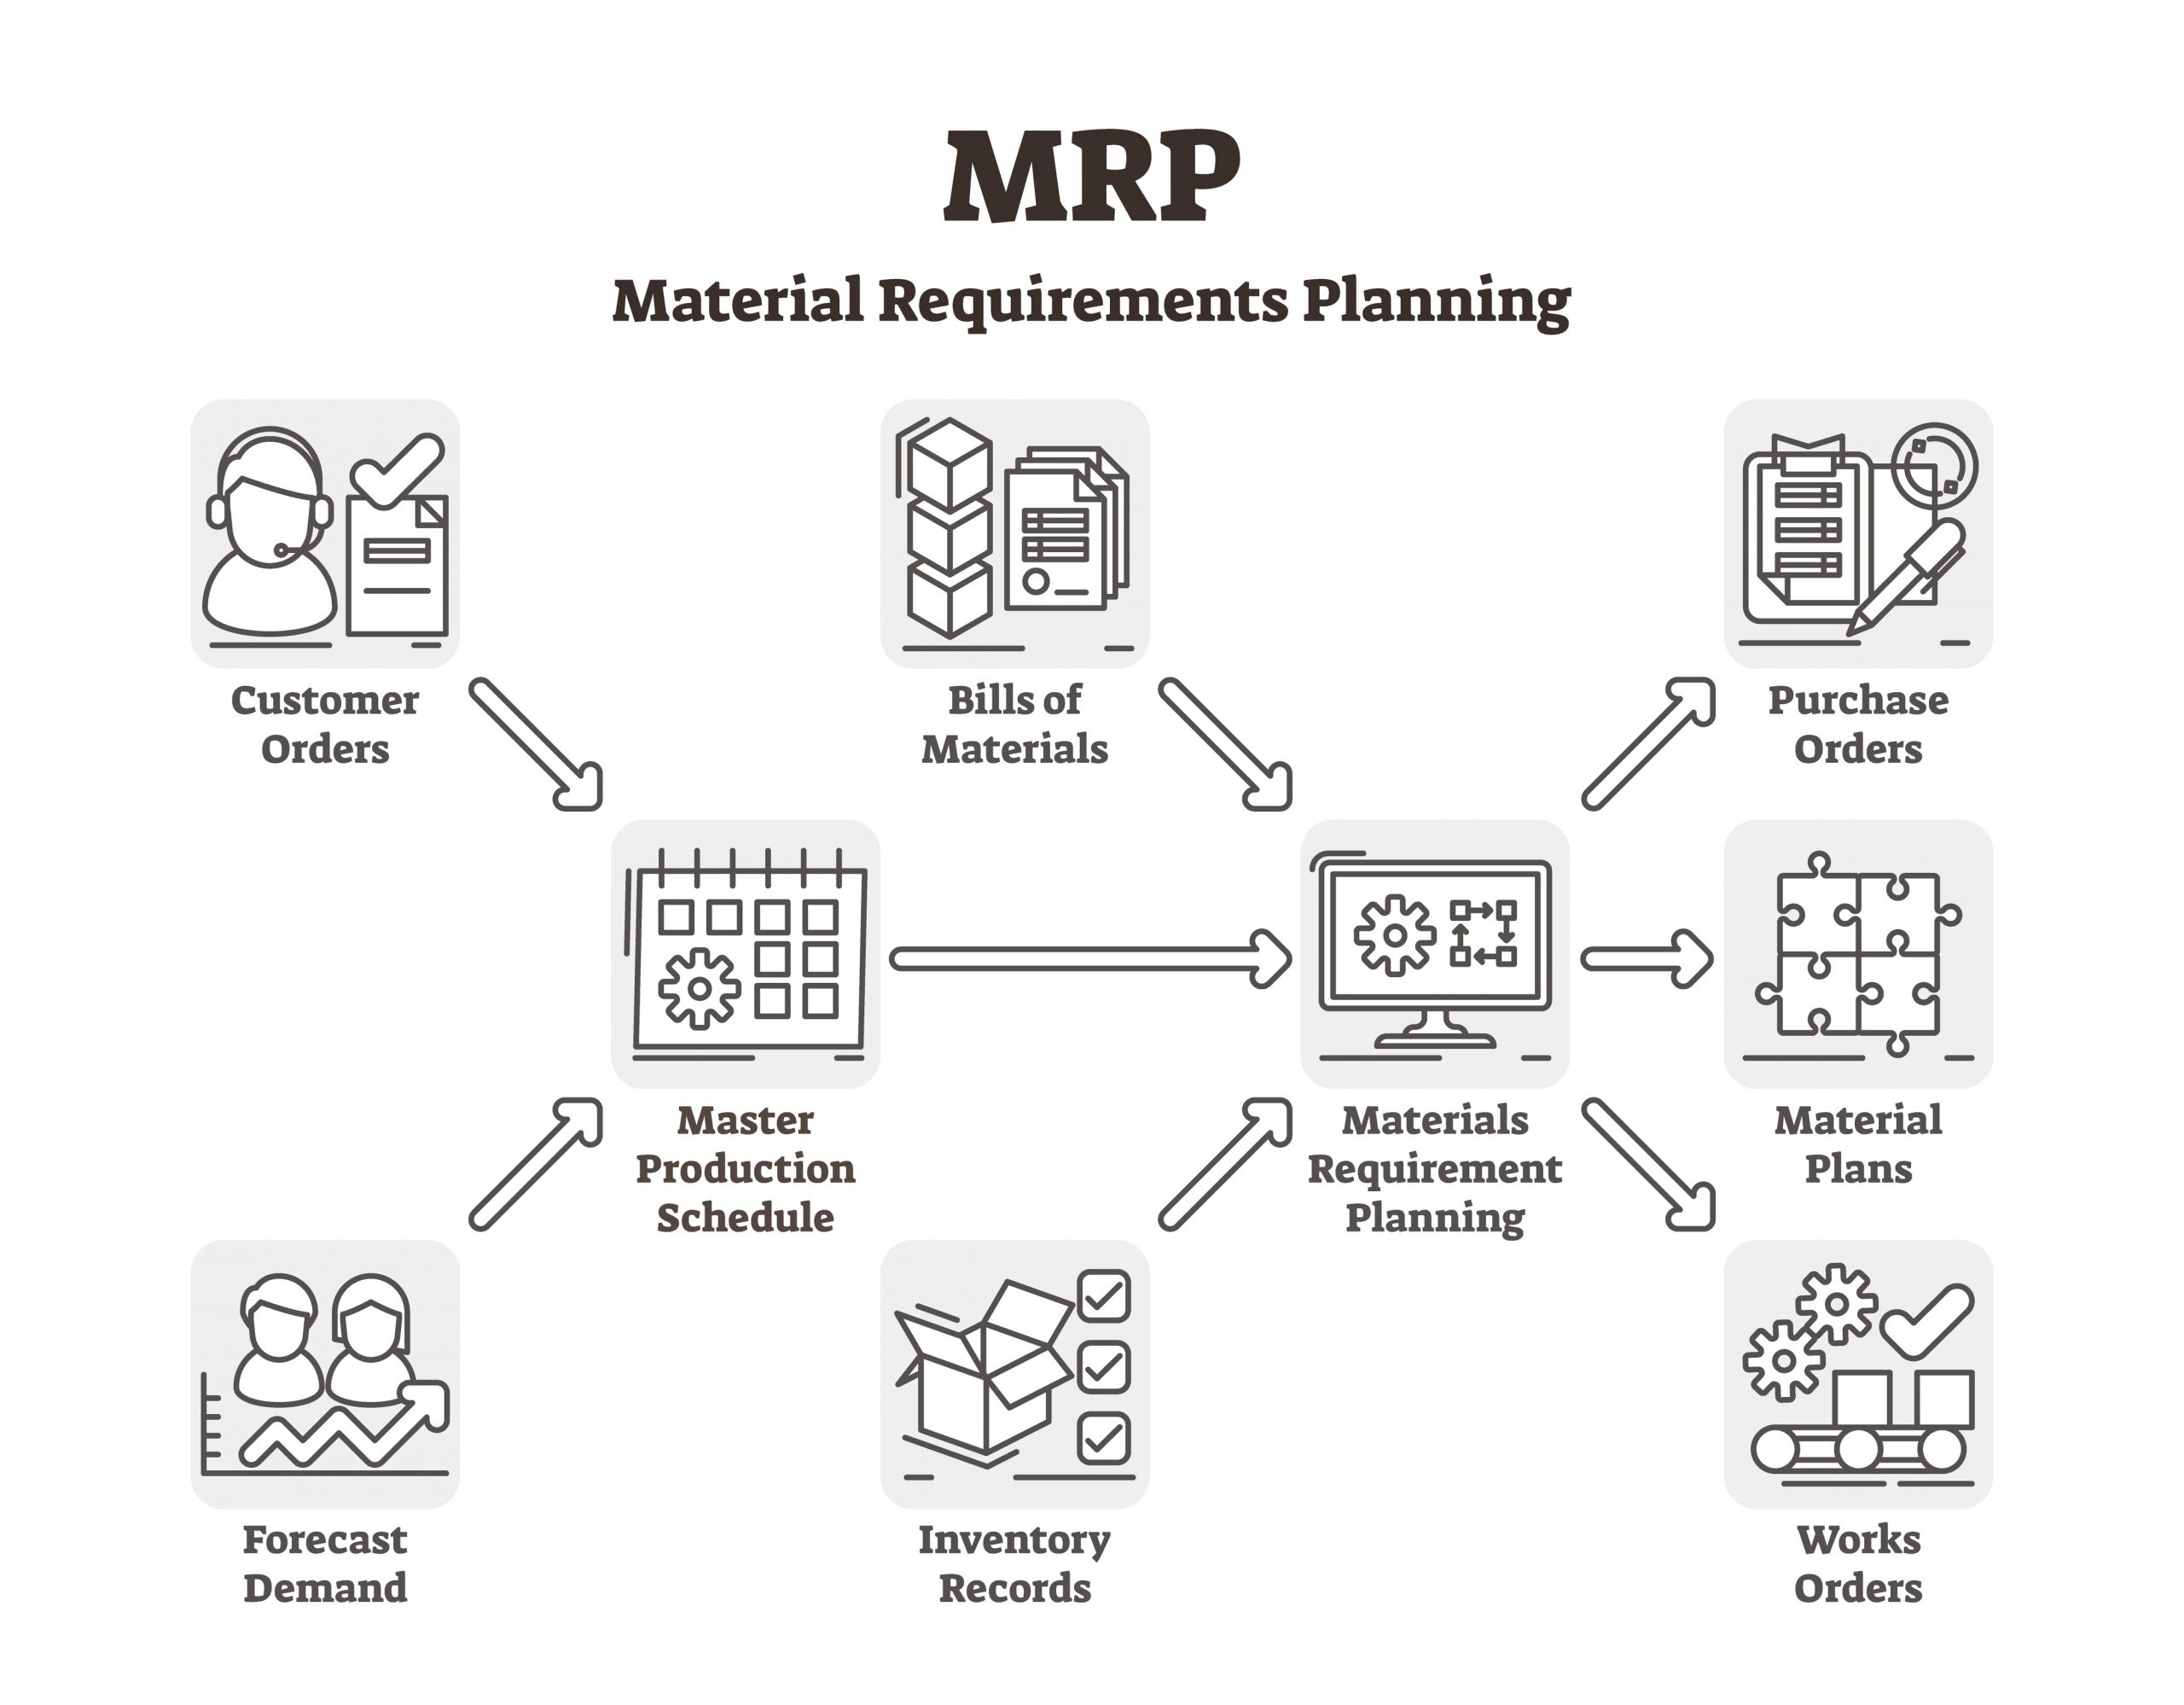 Can MRP Boosts Business Profitability?